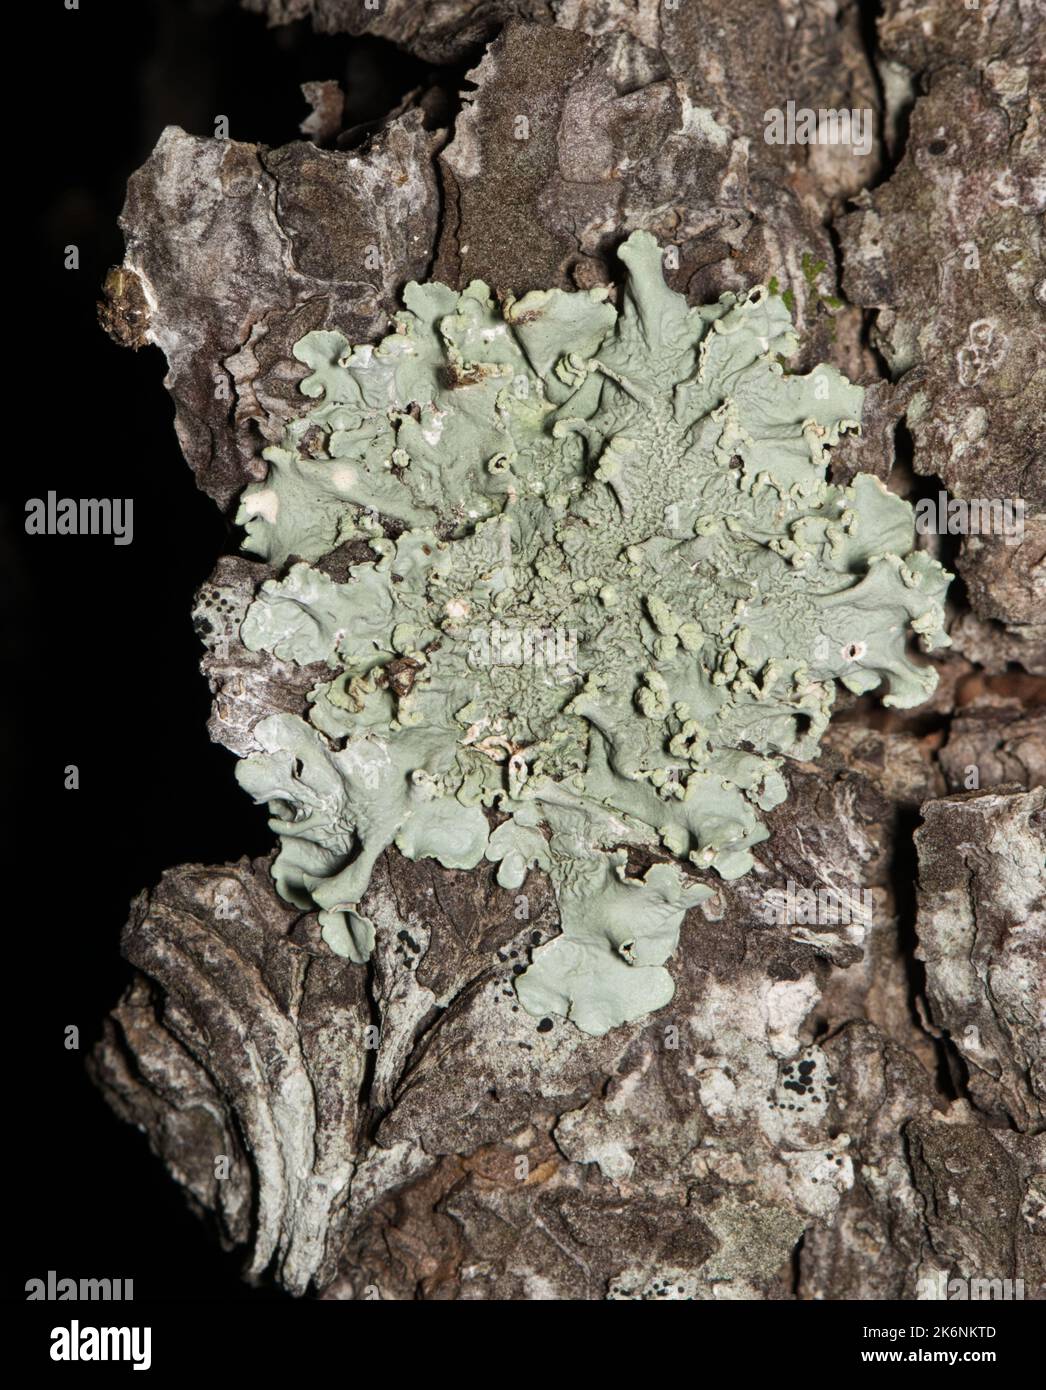 Common Greenshield Lichen (Flavoparmelia caperata) growing on a pine tree at night. Composite organisms unrelated to plants that are found worldwide. Stock Photo